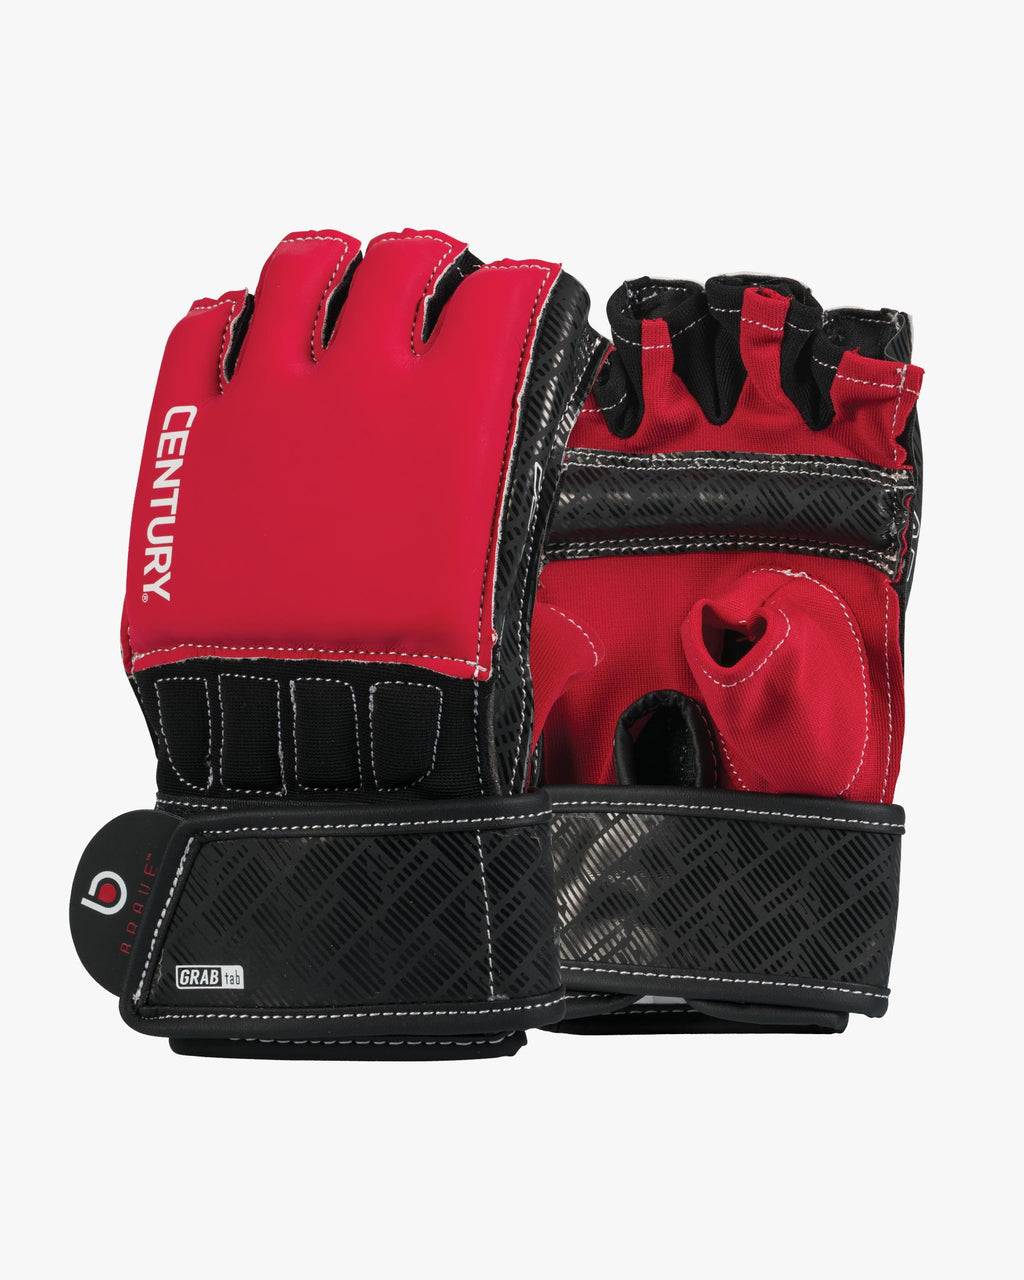 Midwest Gloves & Gear 90CF-EA MAX Grip Glove, RED/Black Large